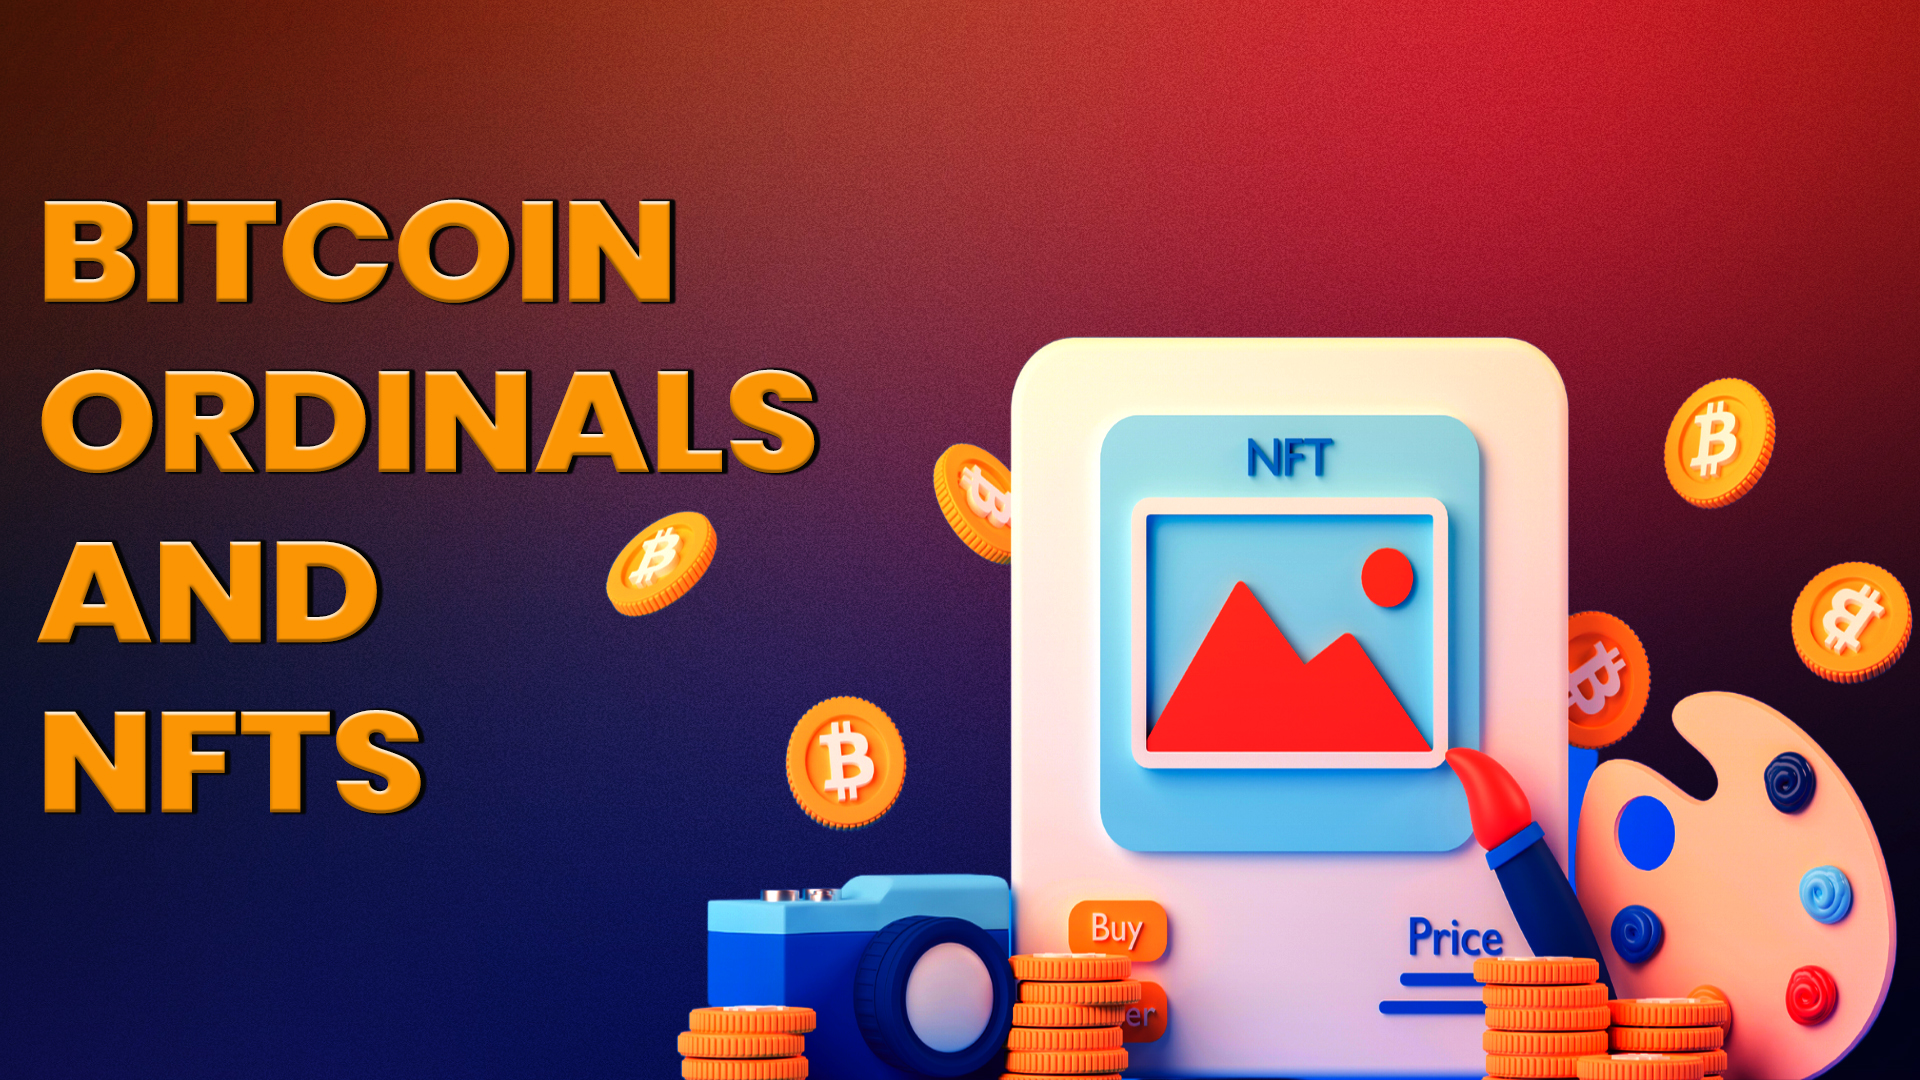 Understanding The Key Differences Between Bitcoin Ordinals And NFTs